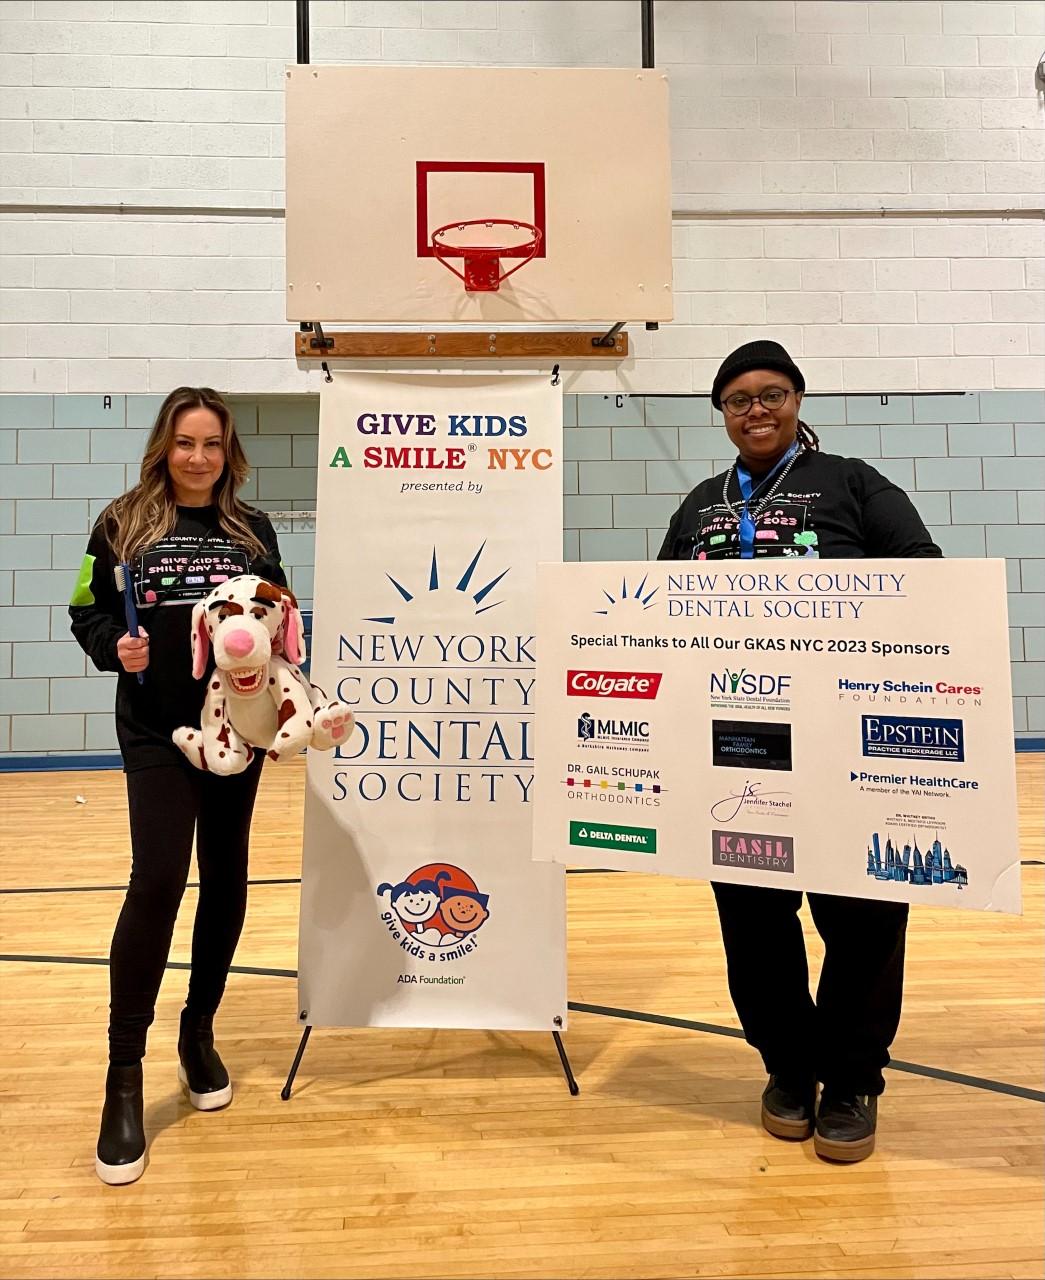 Two people stand by "Give Kids a Smile NYC" signage in a school gym